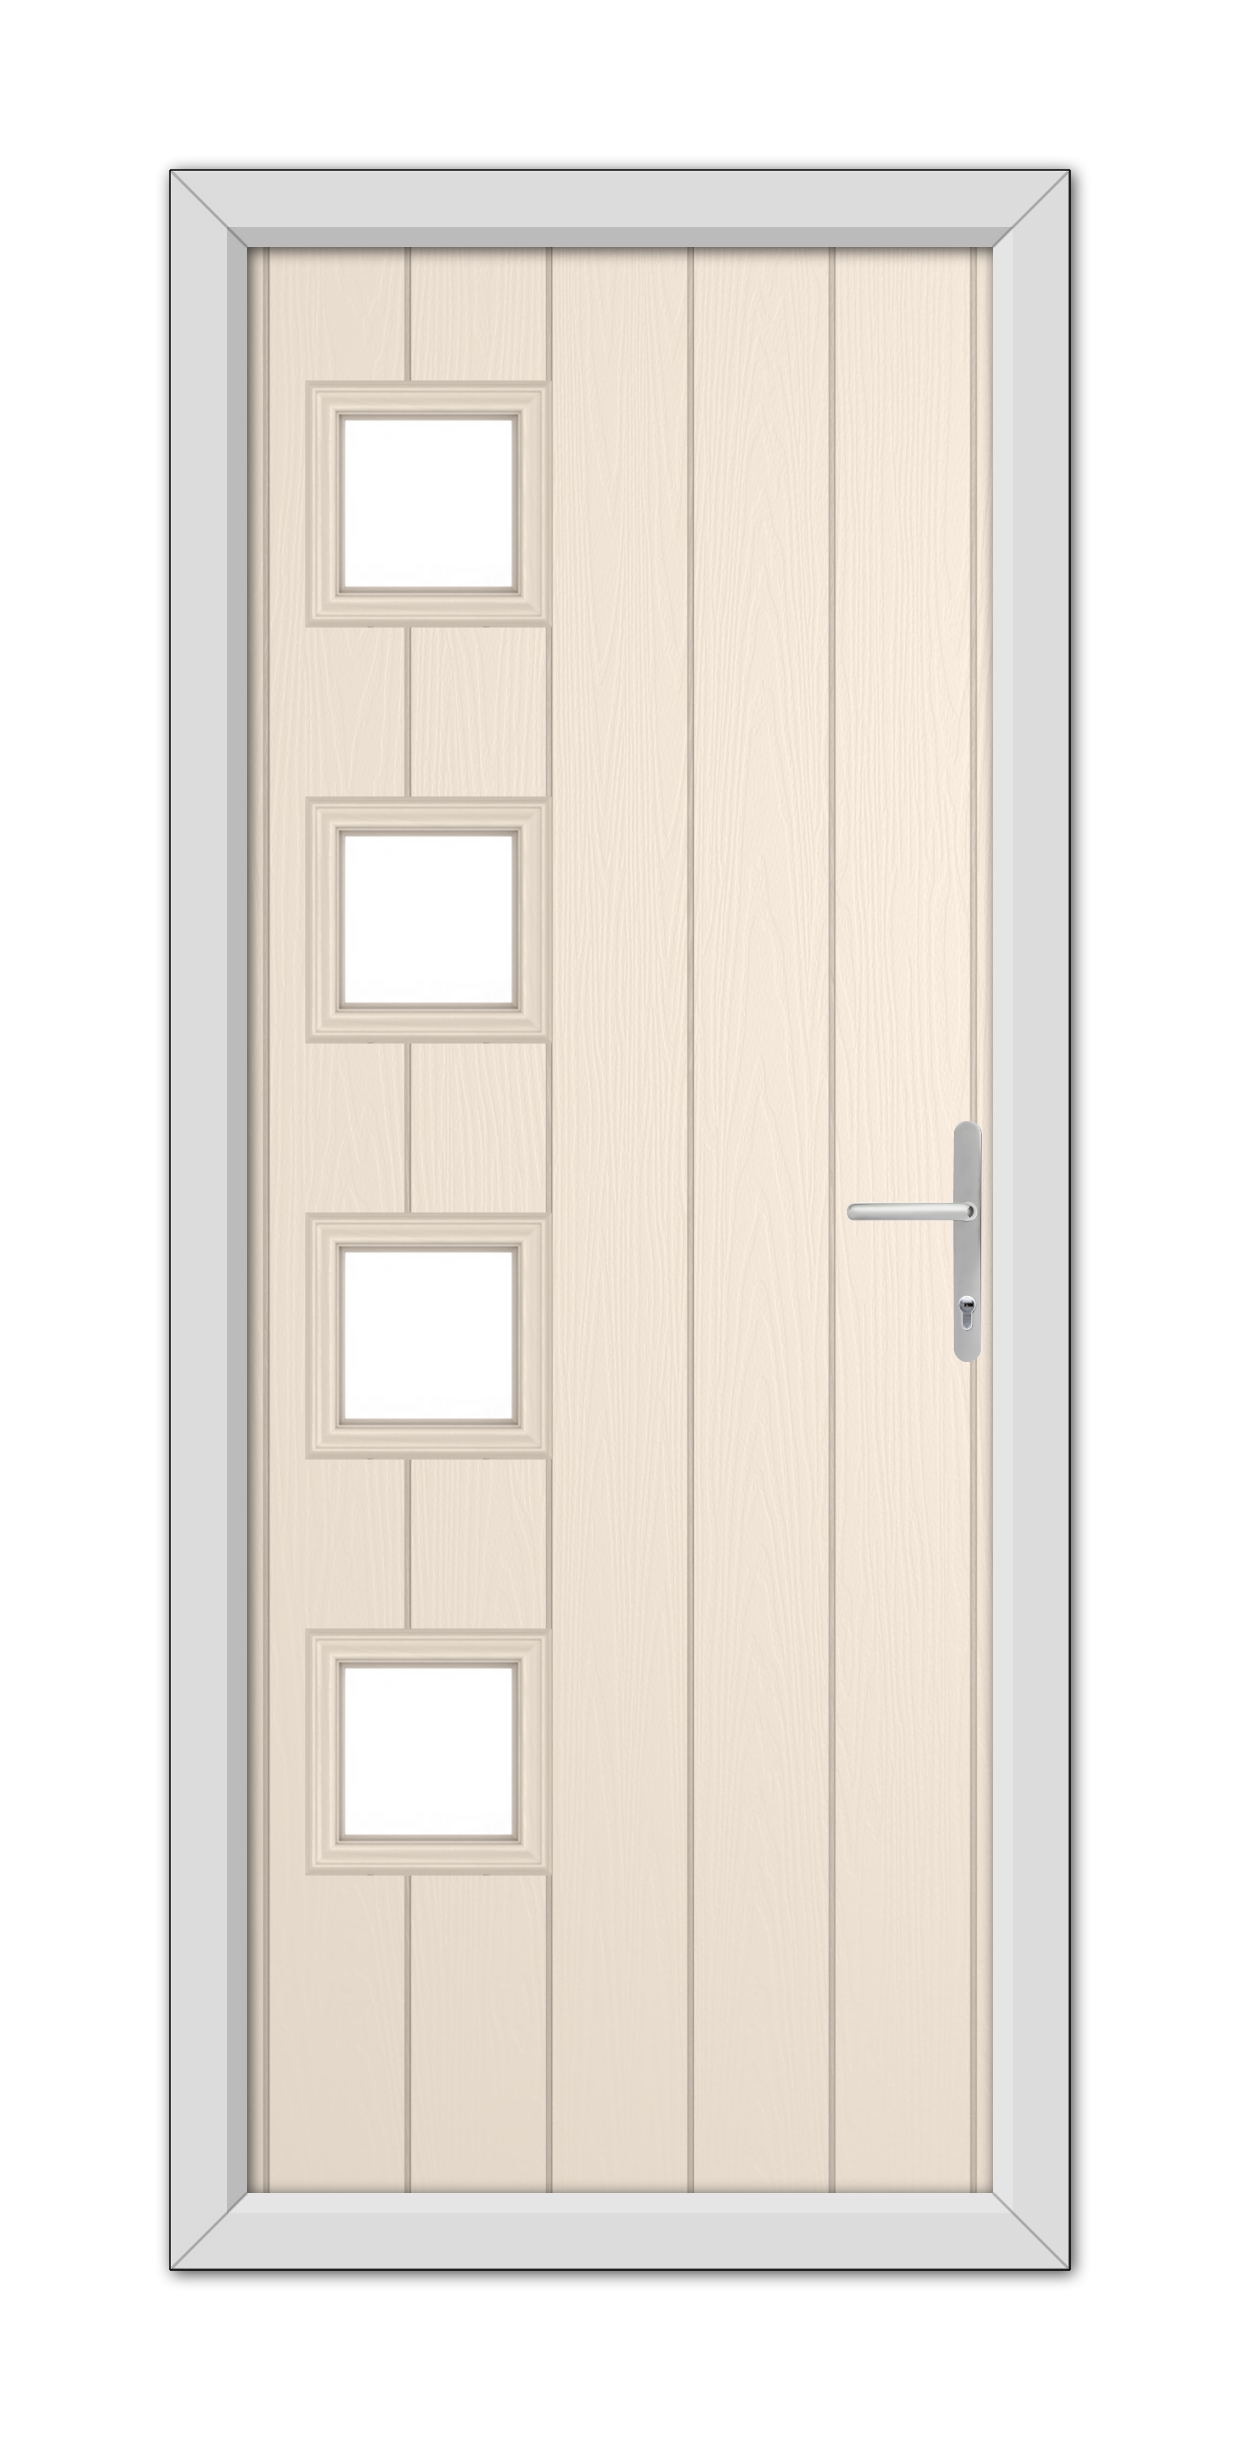 A modern Cream Sussex composite door with four rectangular glass panels and a metal handle, set within a gray frame.